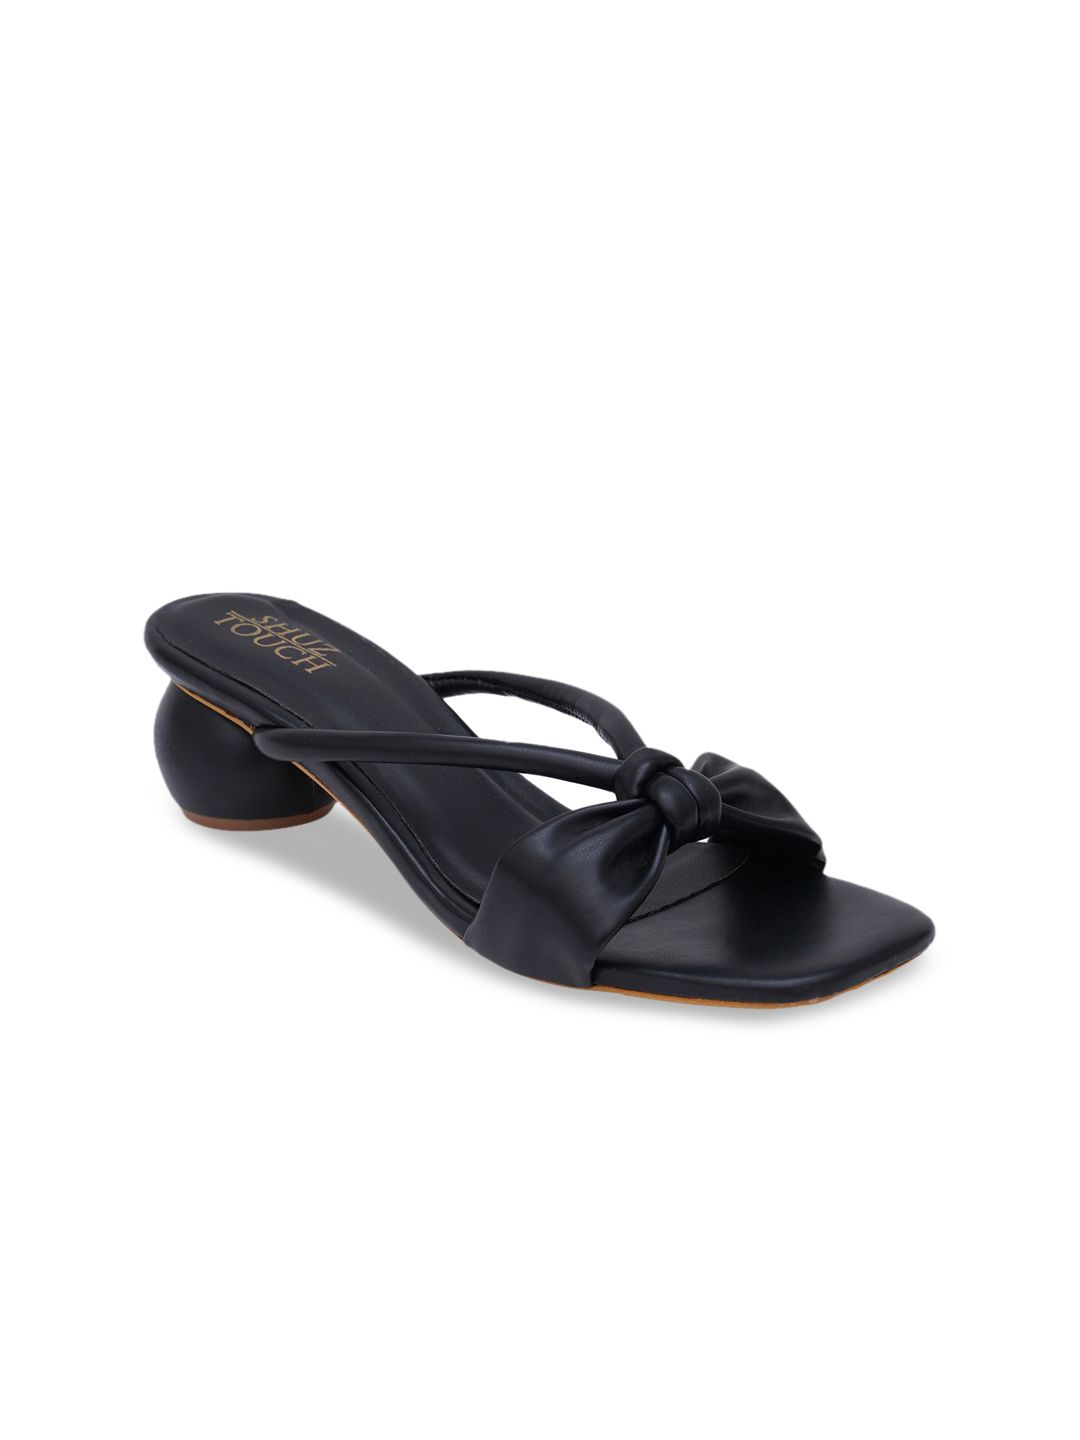 SHUZ TOUCH Black Block Mules with Bows Price in India